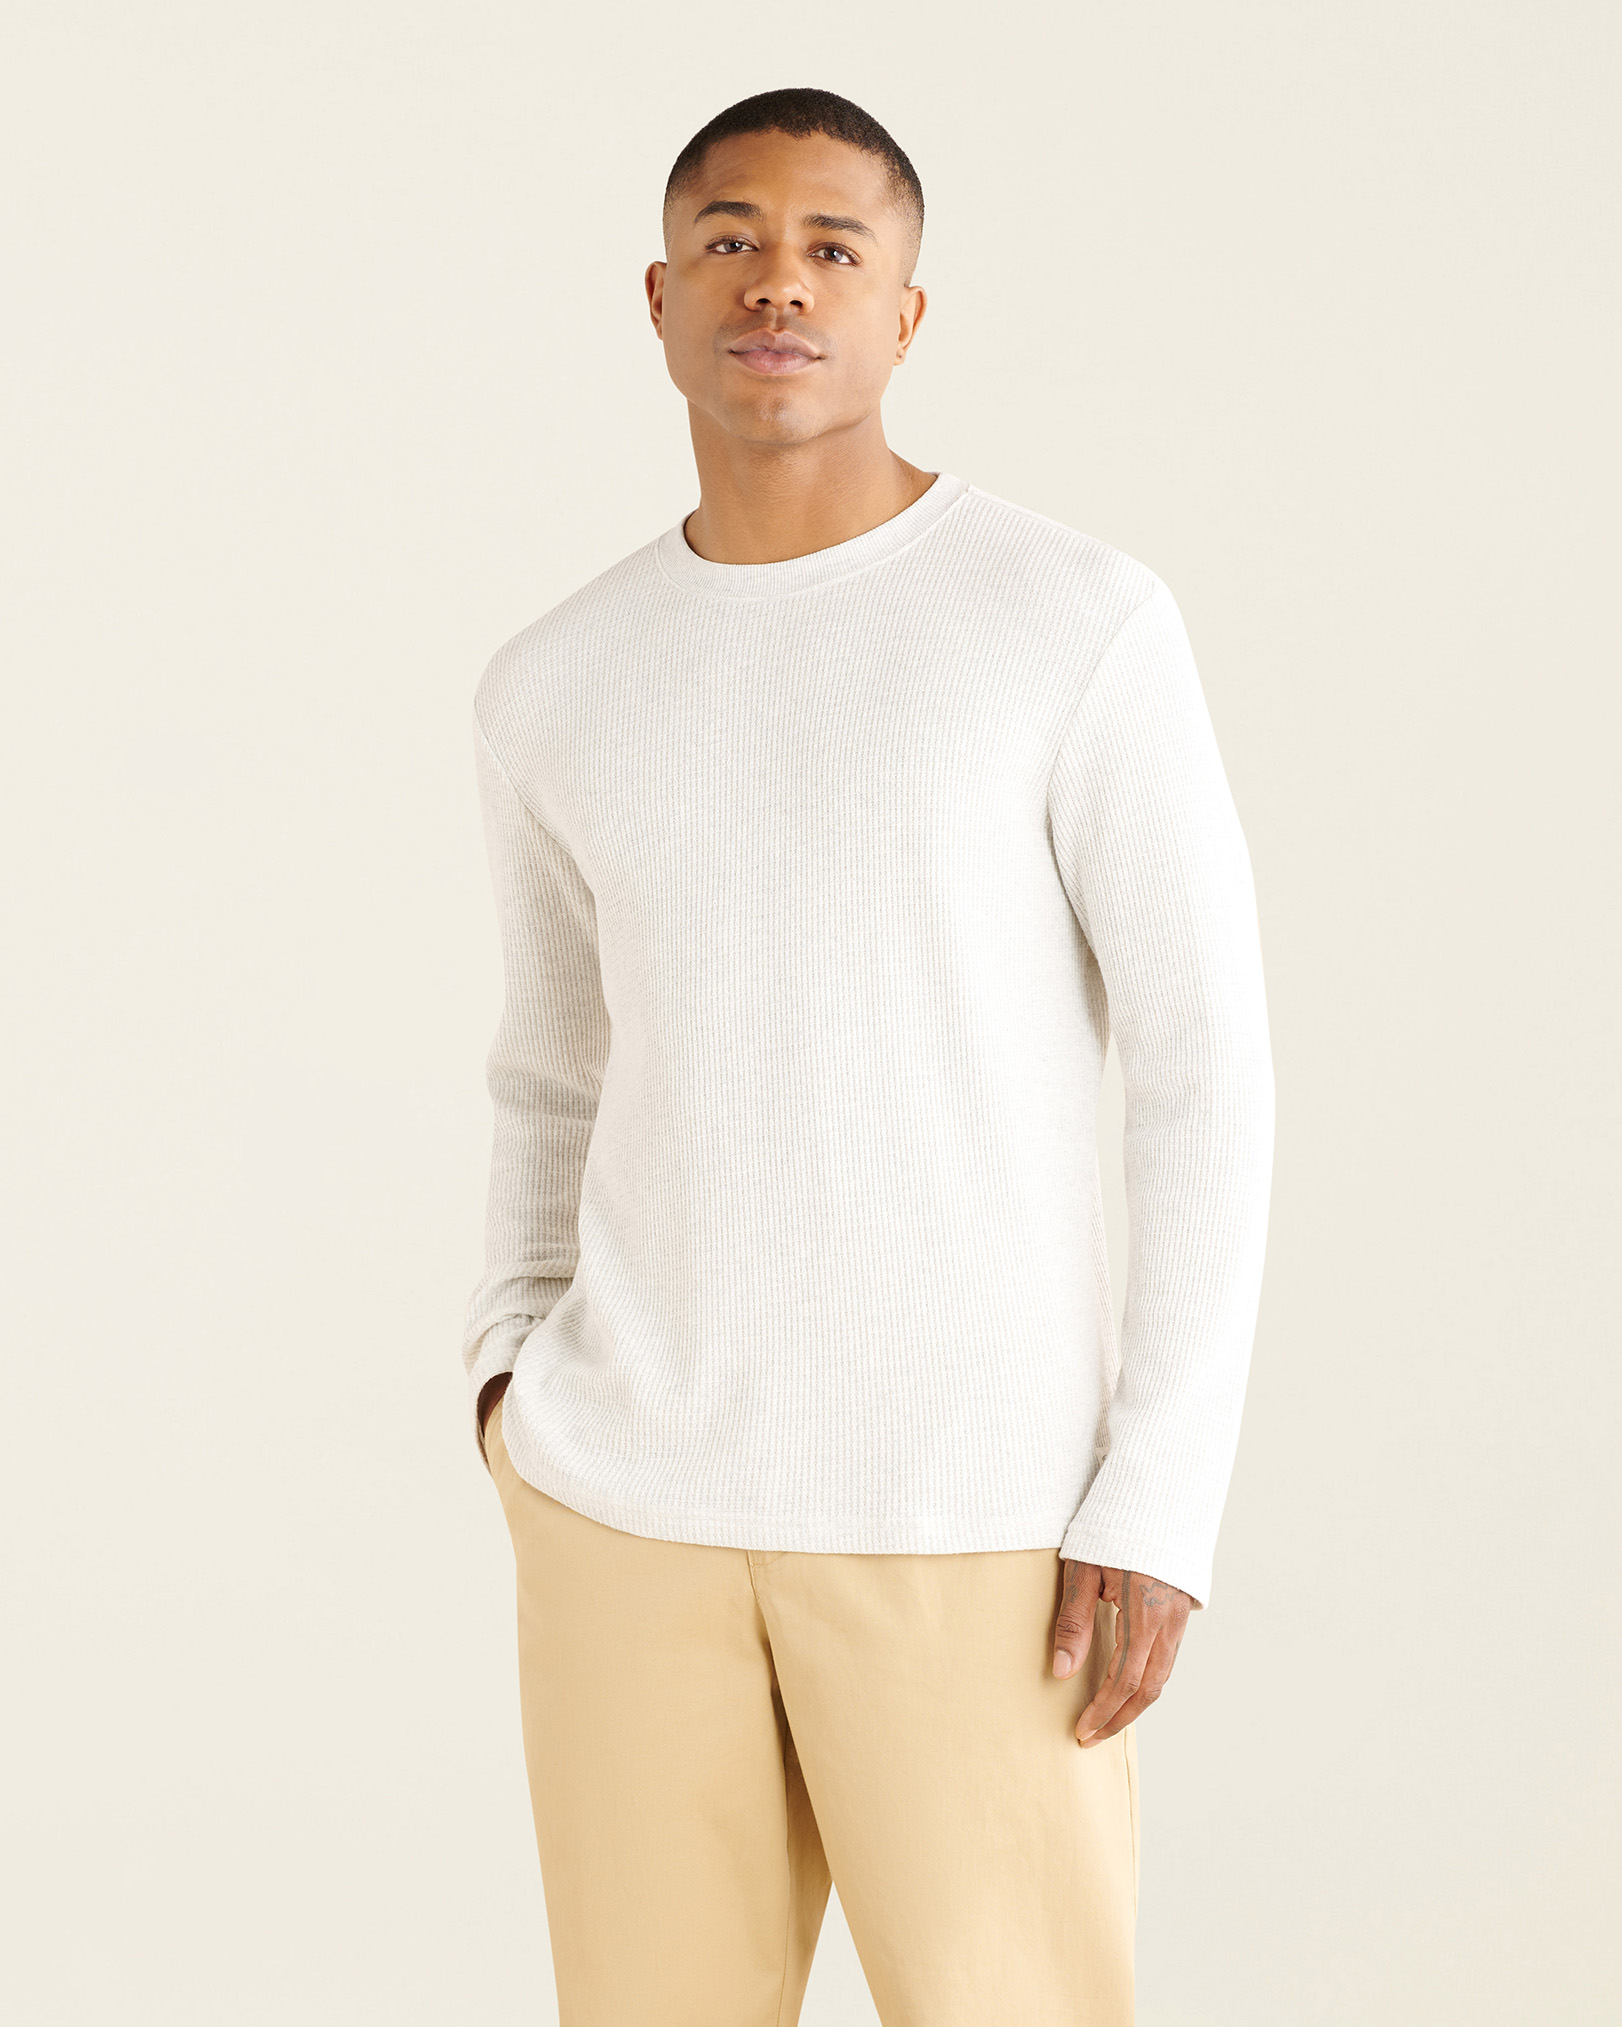 Roots Waffle Long Sleeve Crew Top in White Mix